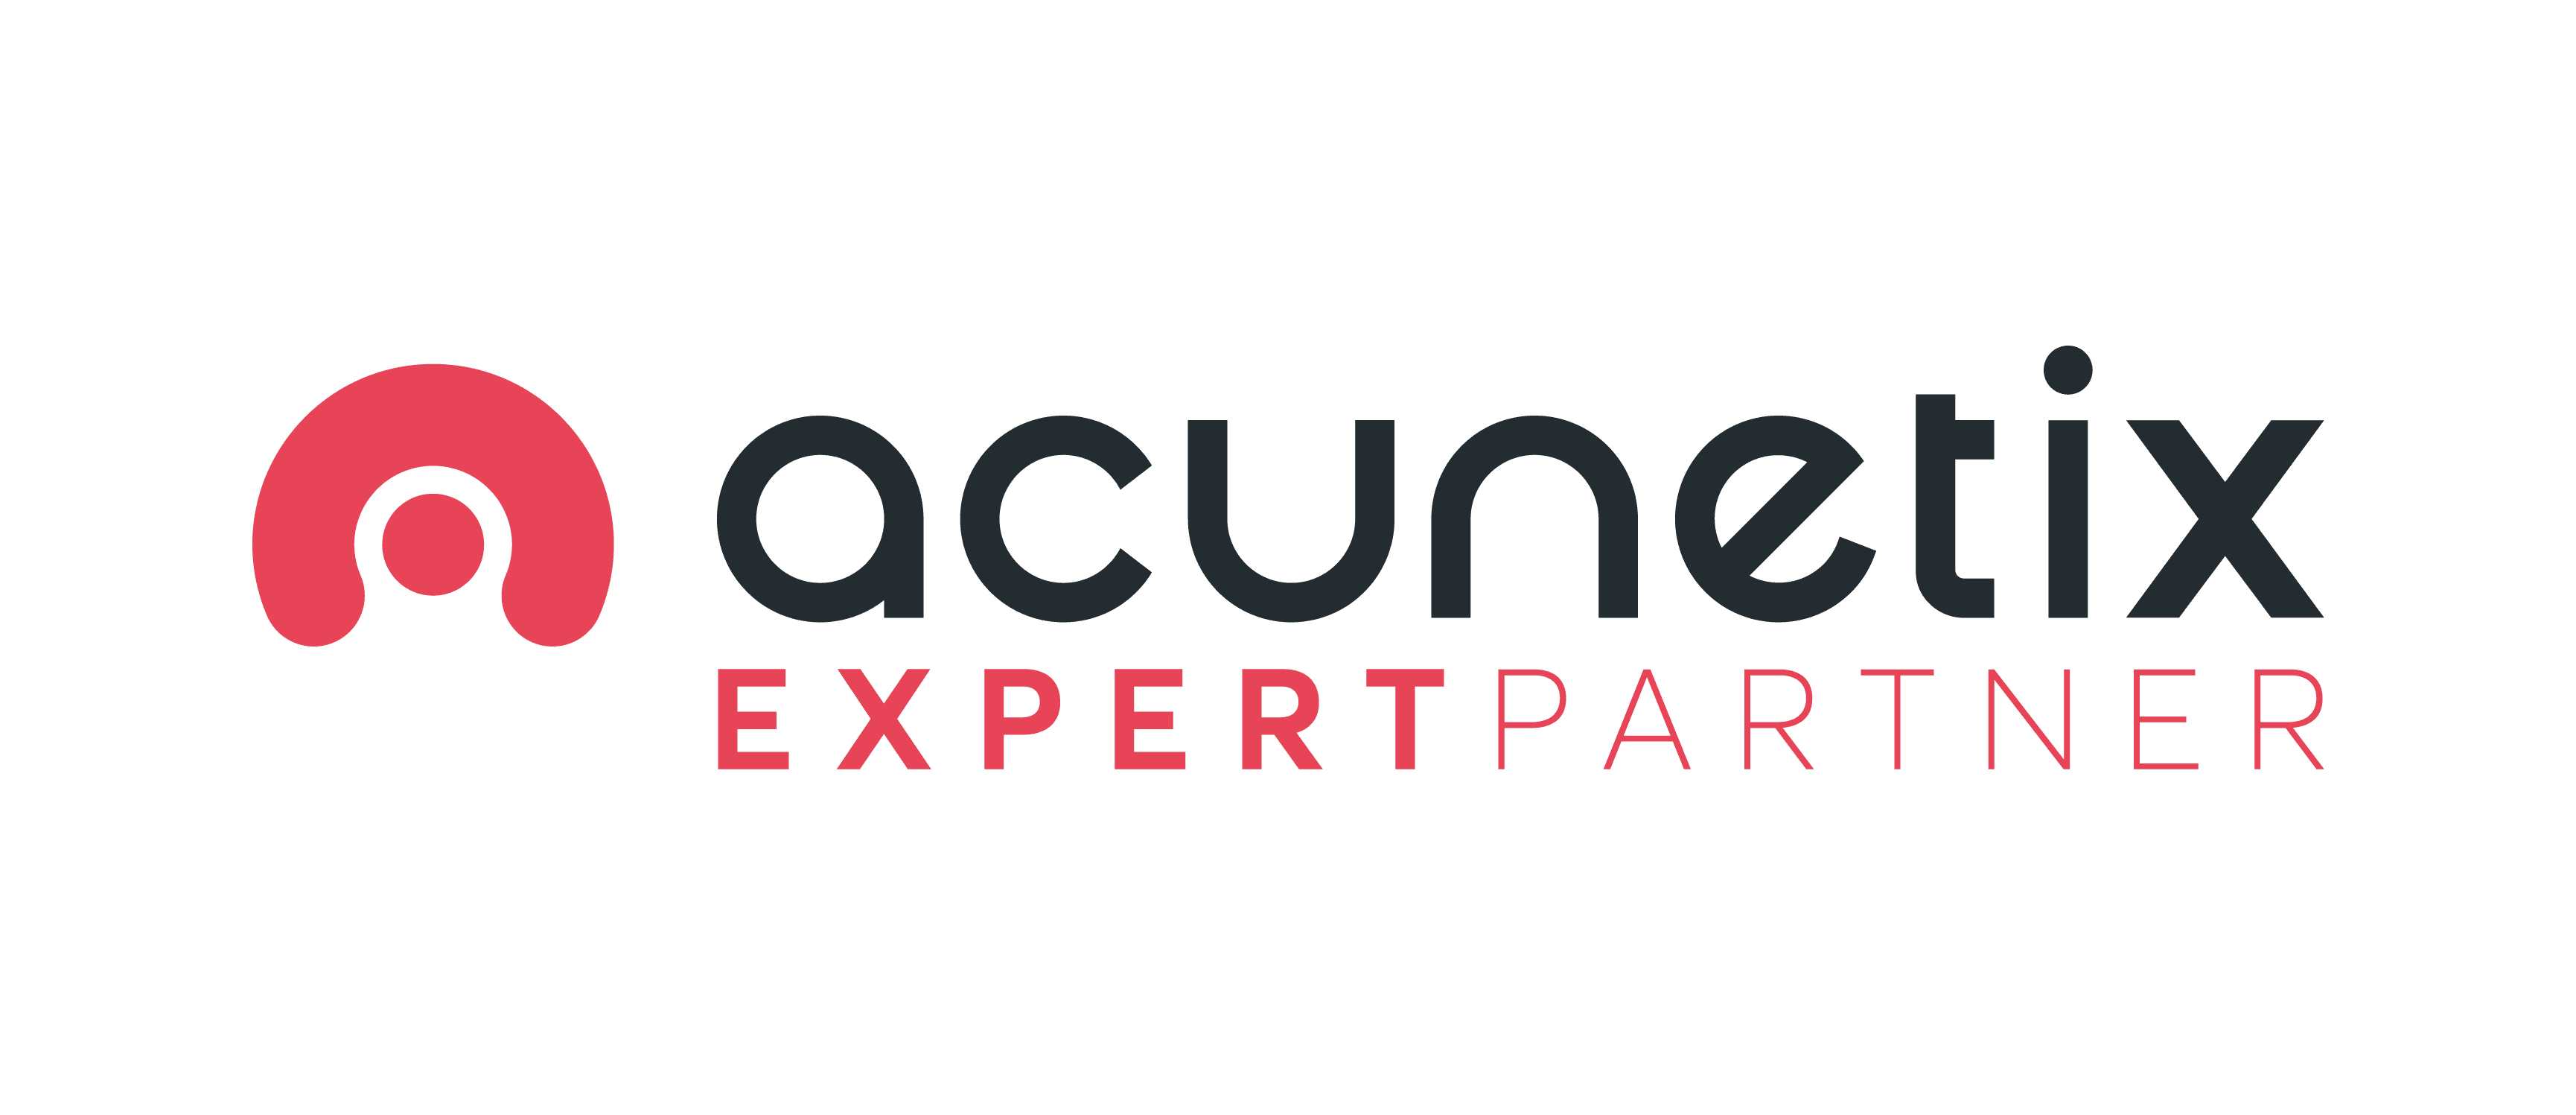 Acunetix Partner In St. Louis and Grand Rapids